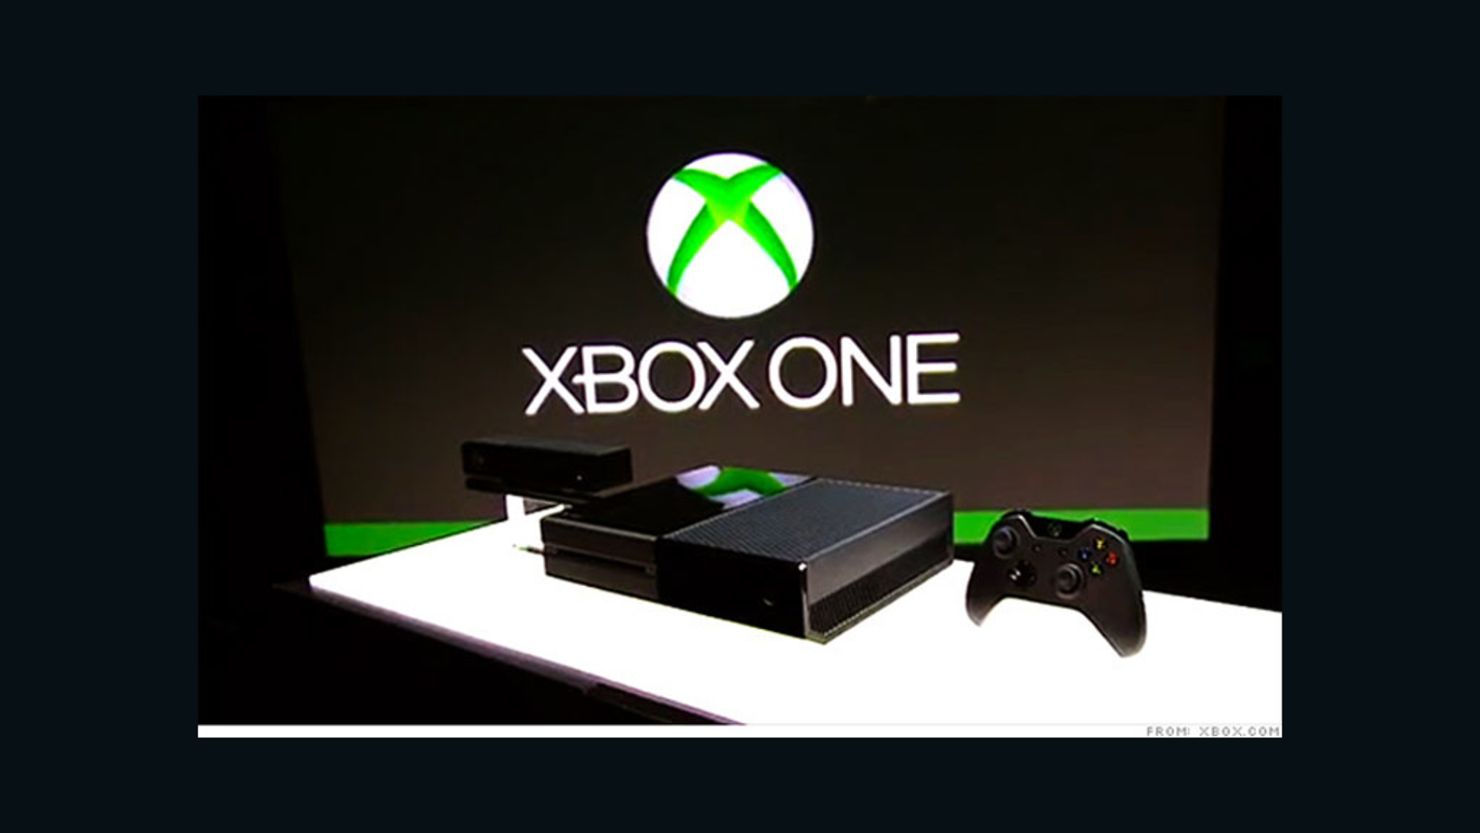 The Xbox One console has cost $499 since it went on sale last November.